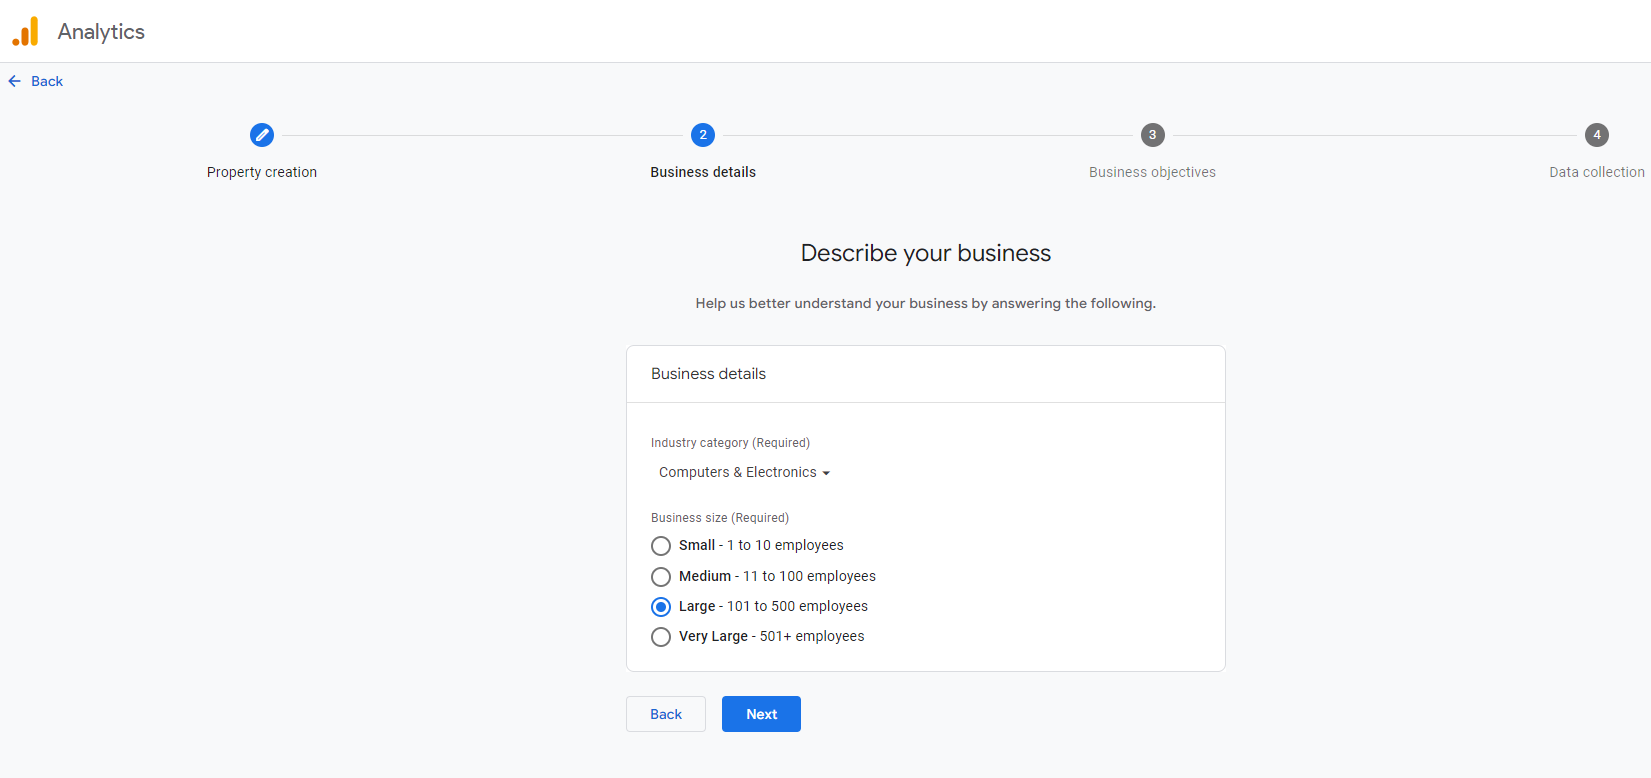 Google Analytics Interface for Describing Your Business